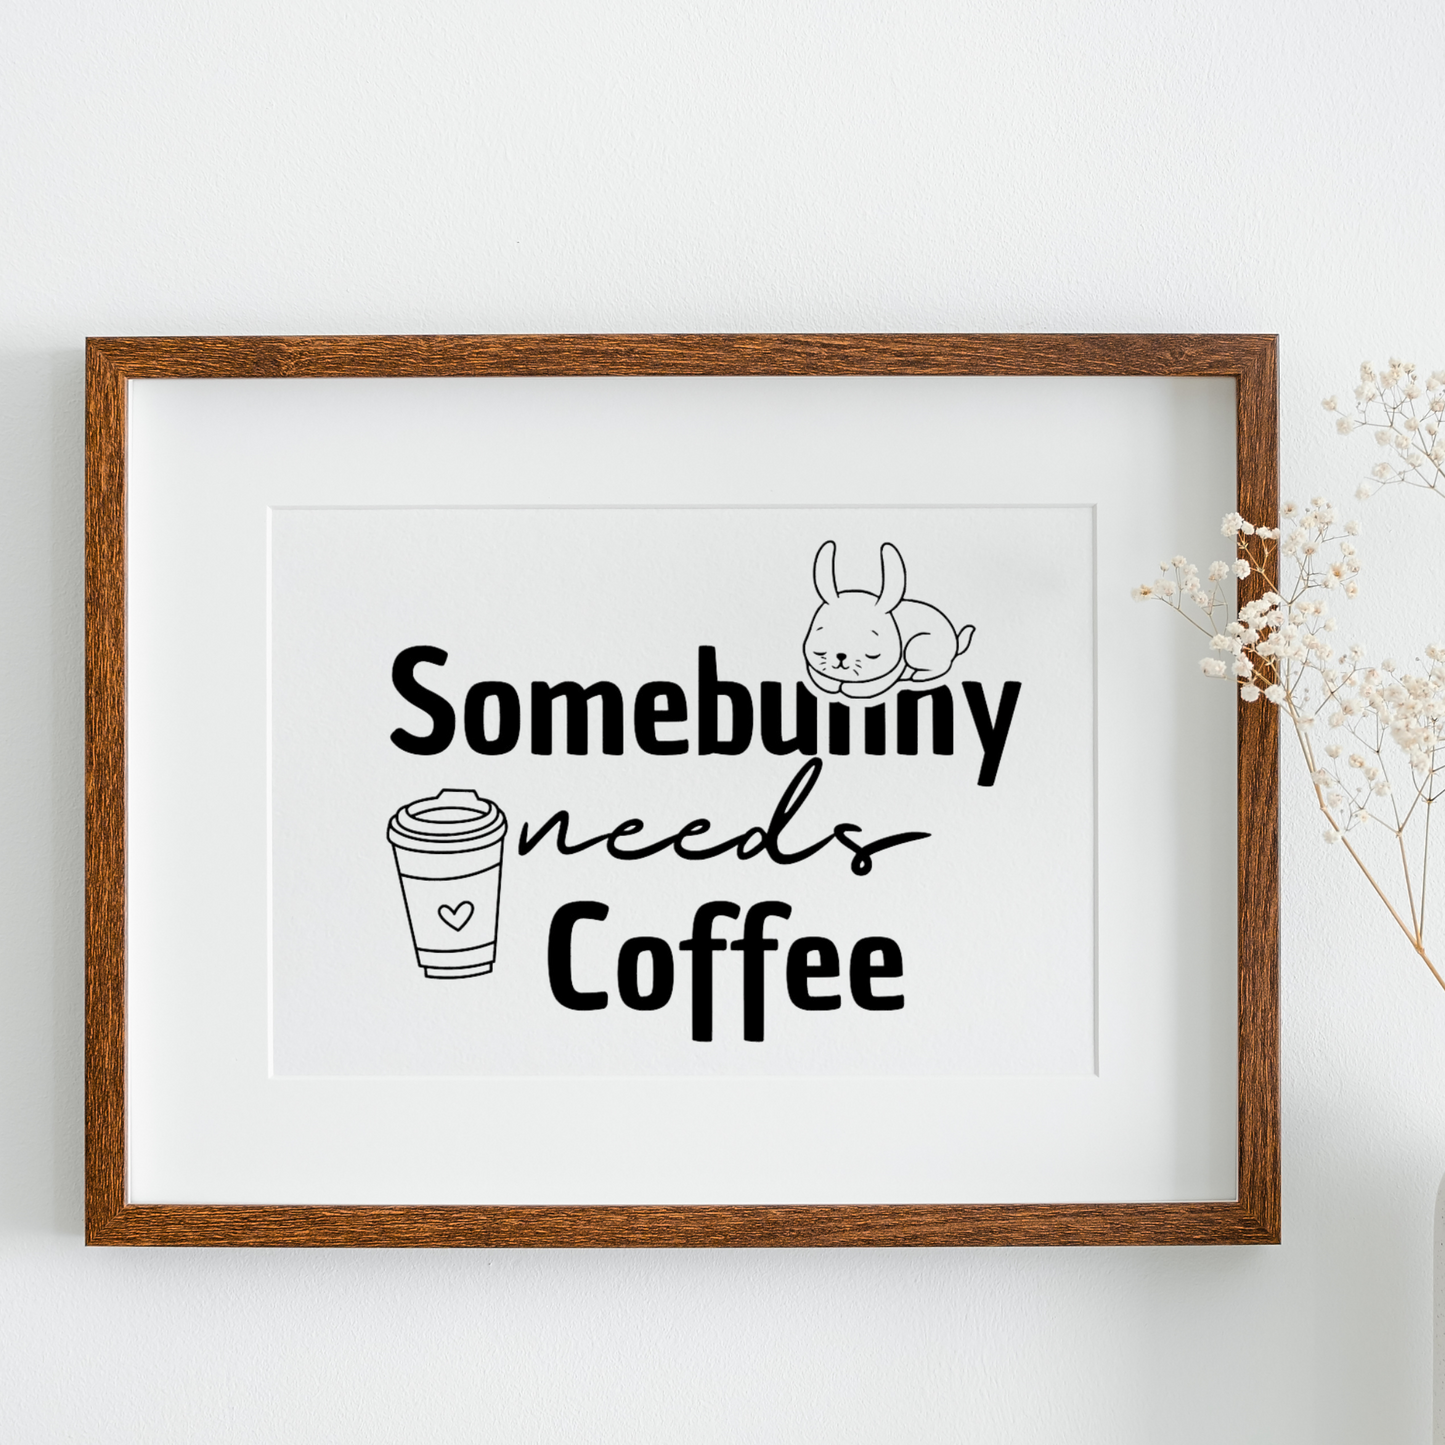 Poster A4 "Somebunny needs Coffee"